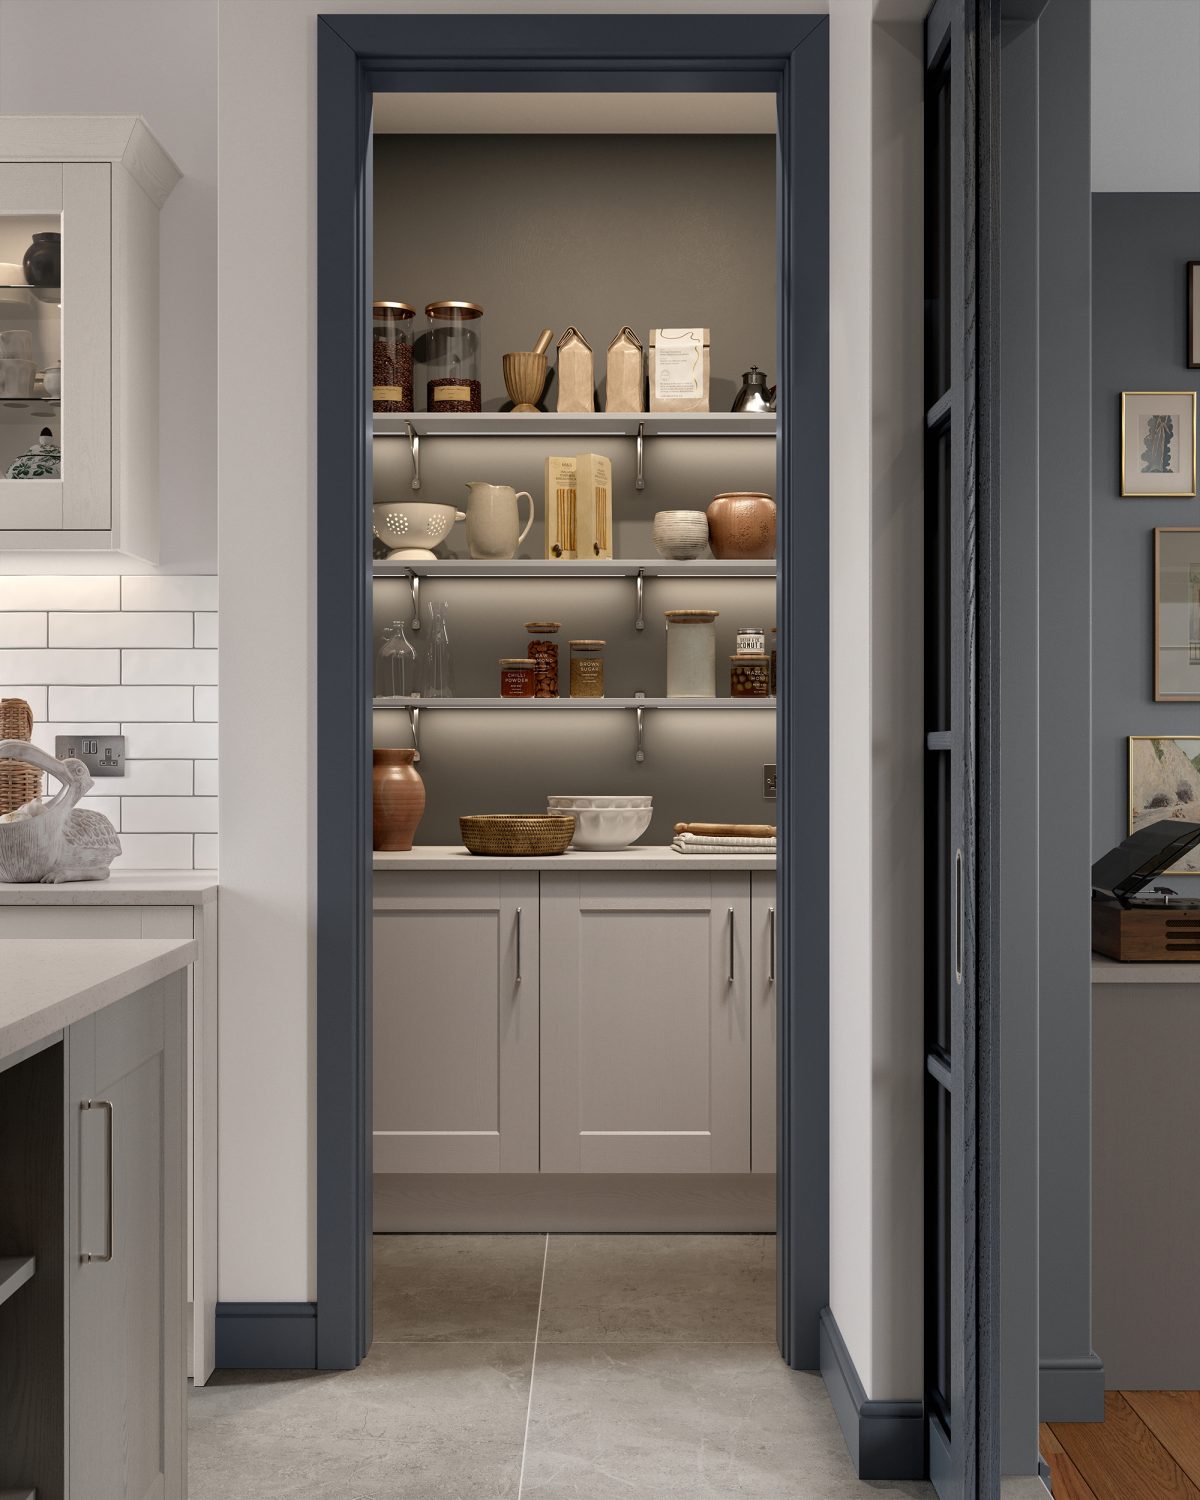 Kendal Light Grey shaker kitchen by The Kitchen Depot walk in pantry